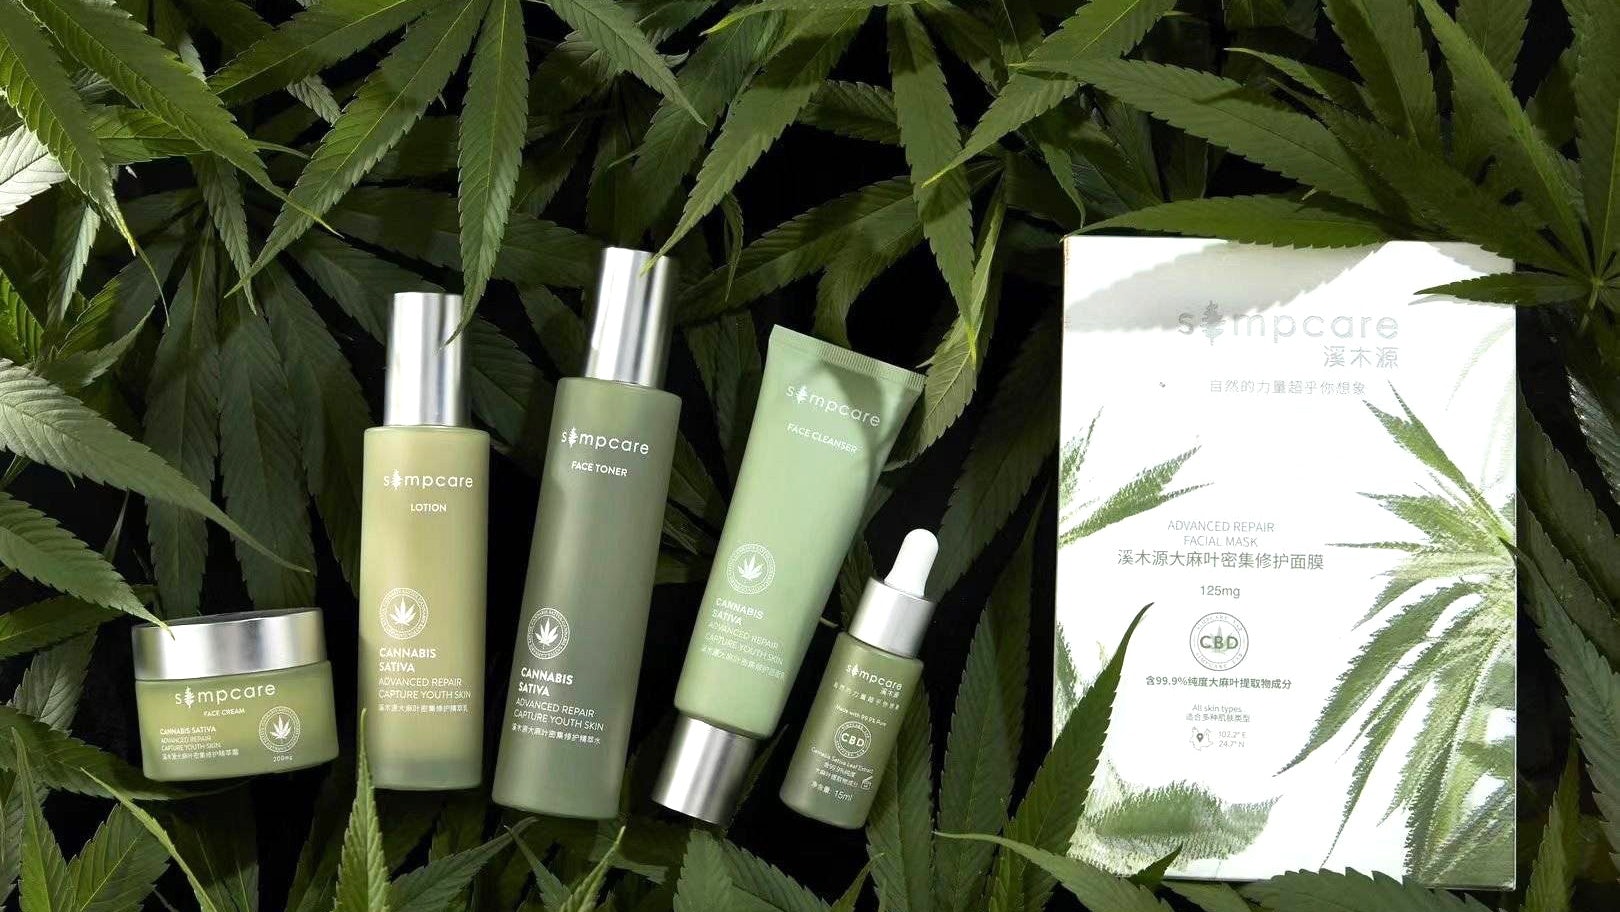 If China continues to prohibit Cannabis-related ingredients in cosmetics, it will lose an enormous market opportunity, as the budding industry will move overseas. Photo: Courtesy of Simpcare